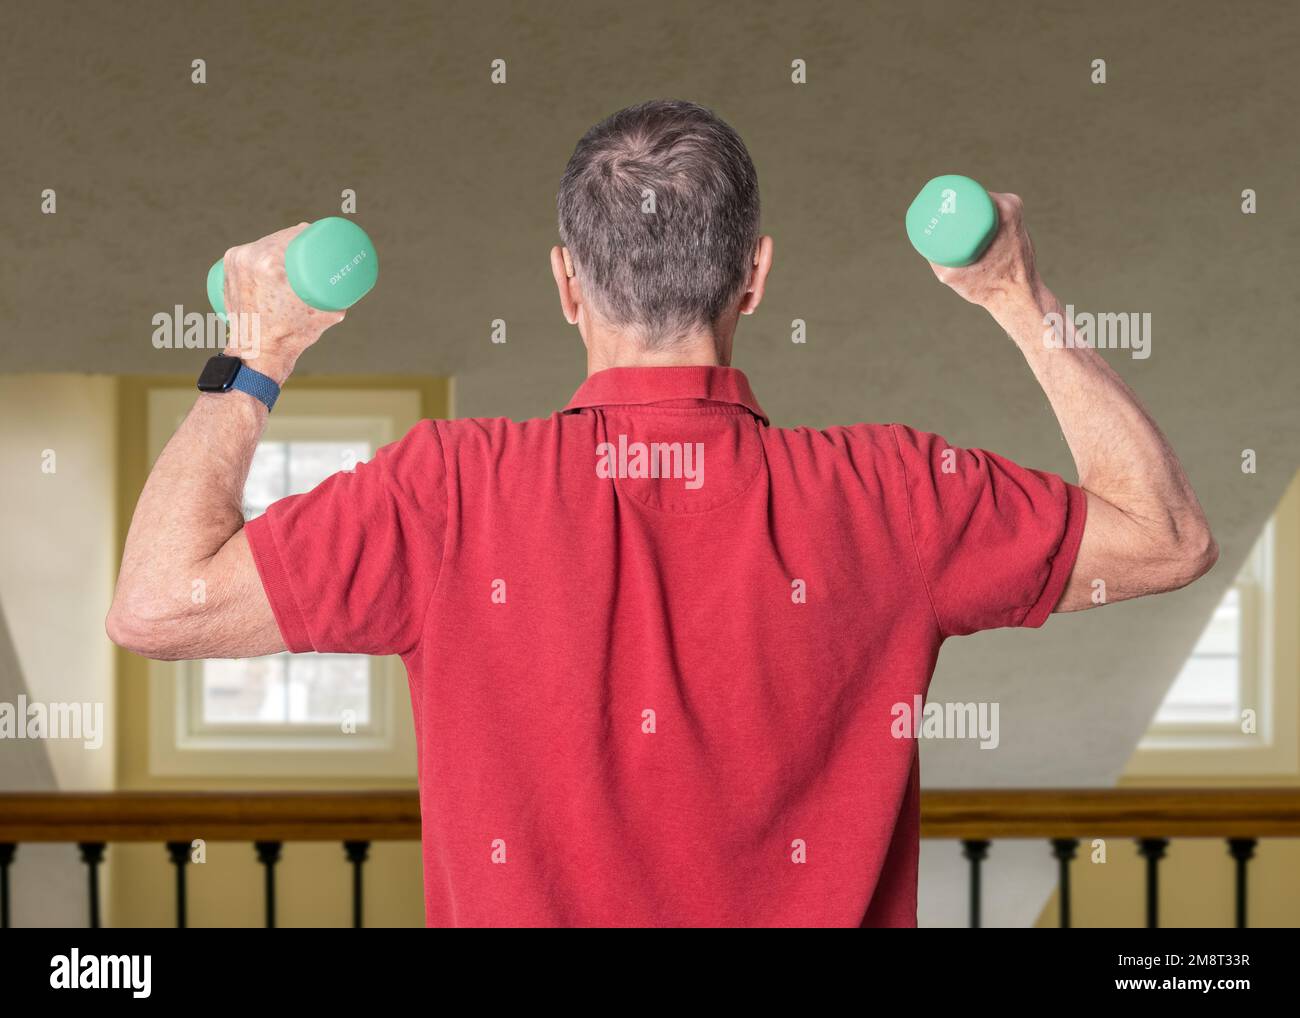 Senior man in red shirt seen from back and exercising with dumbbells in home against railing Stock Photo